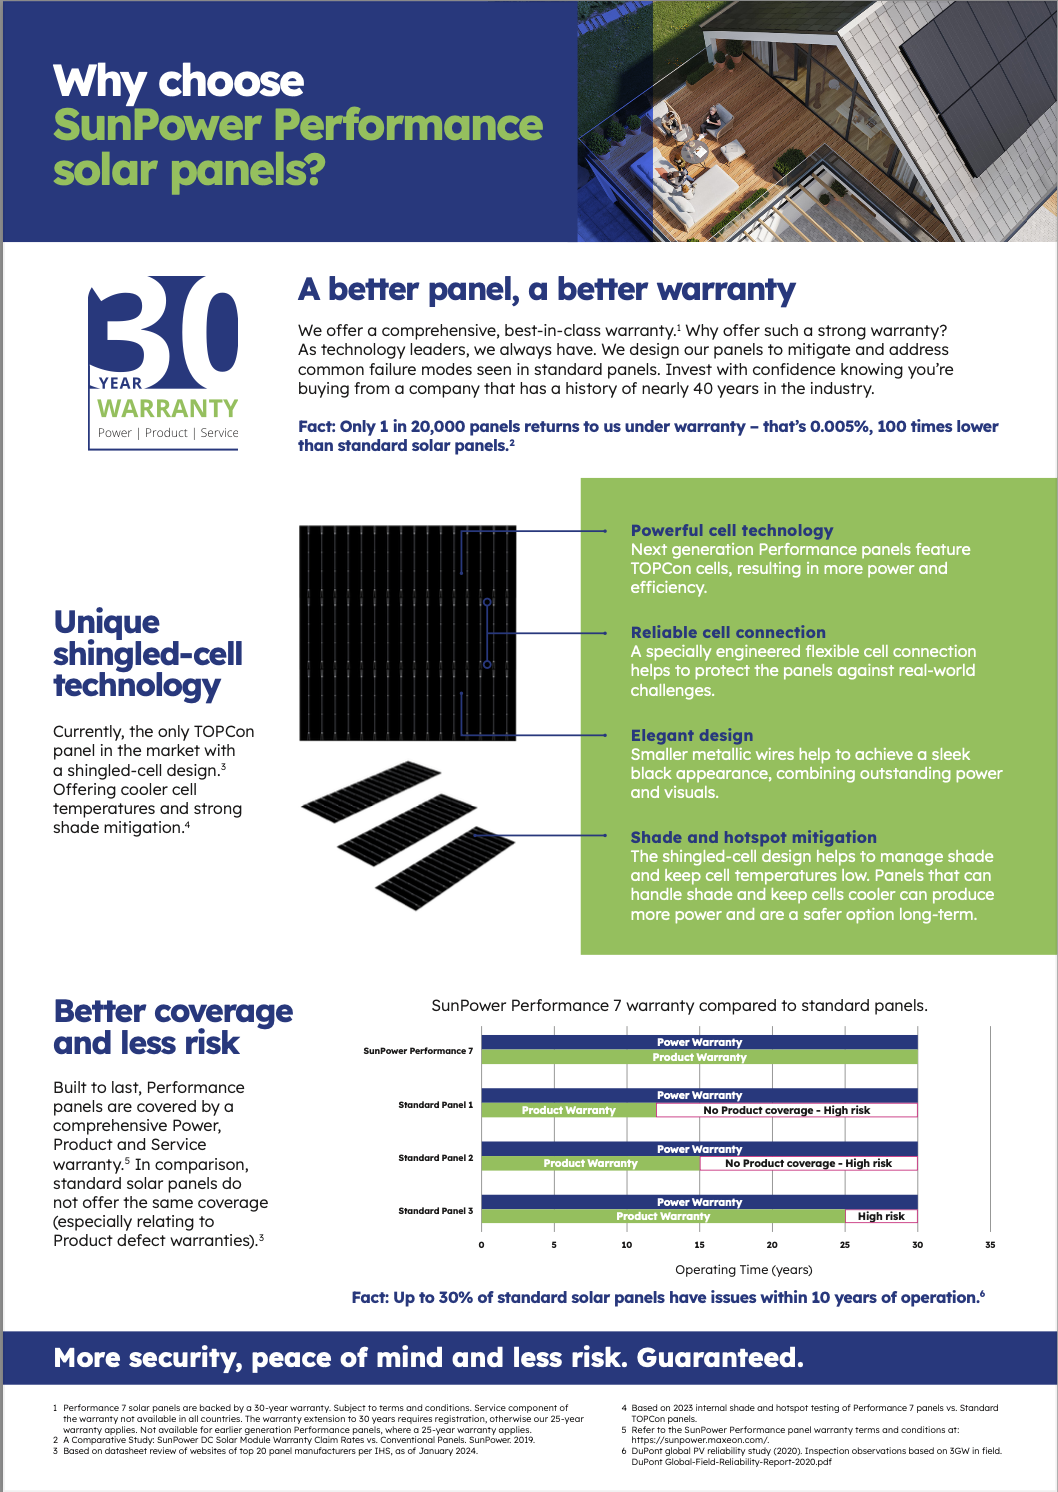 Flyer for SunPower Performance 7 solar panels highlighting their powerful cell technology, elegant design, and reliable cell connection. It emphasizes the unique shingled-cell technology for shade and hotspot mitigation, ensuring high lifetime energy production. The flyer also promotes the comprehensive 30-year warranty for power, product, and service, and compares SunPower's warranty coverage favorably against standard solar panels. Key benefits include better coverage, less risk, and more security, peace of mind, and long-term reliability.